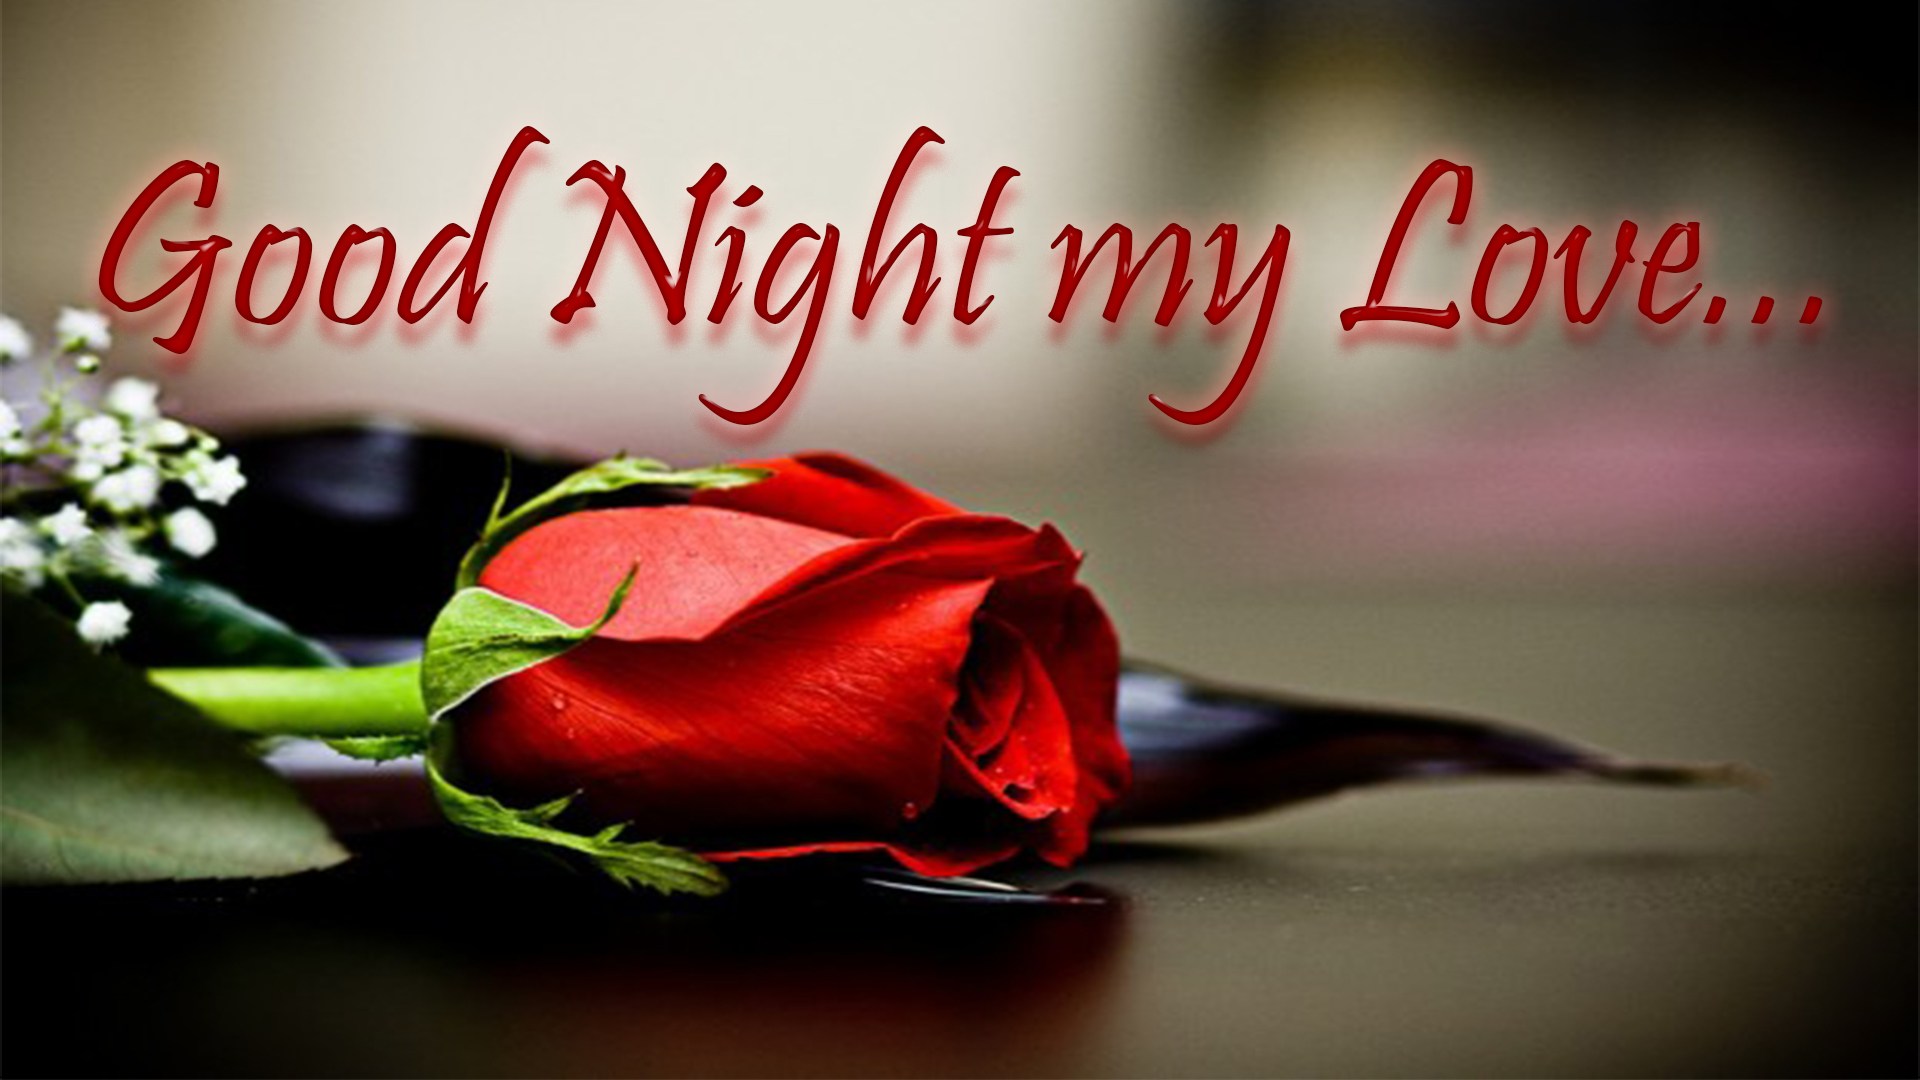 97+ Good Night Images With Love, Good Night Love Photo For Lovers